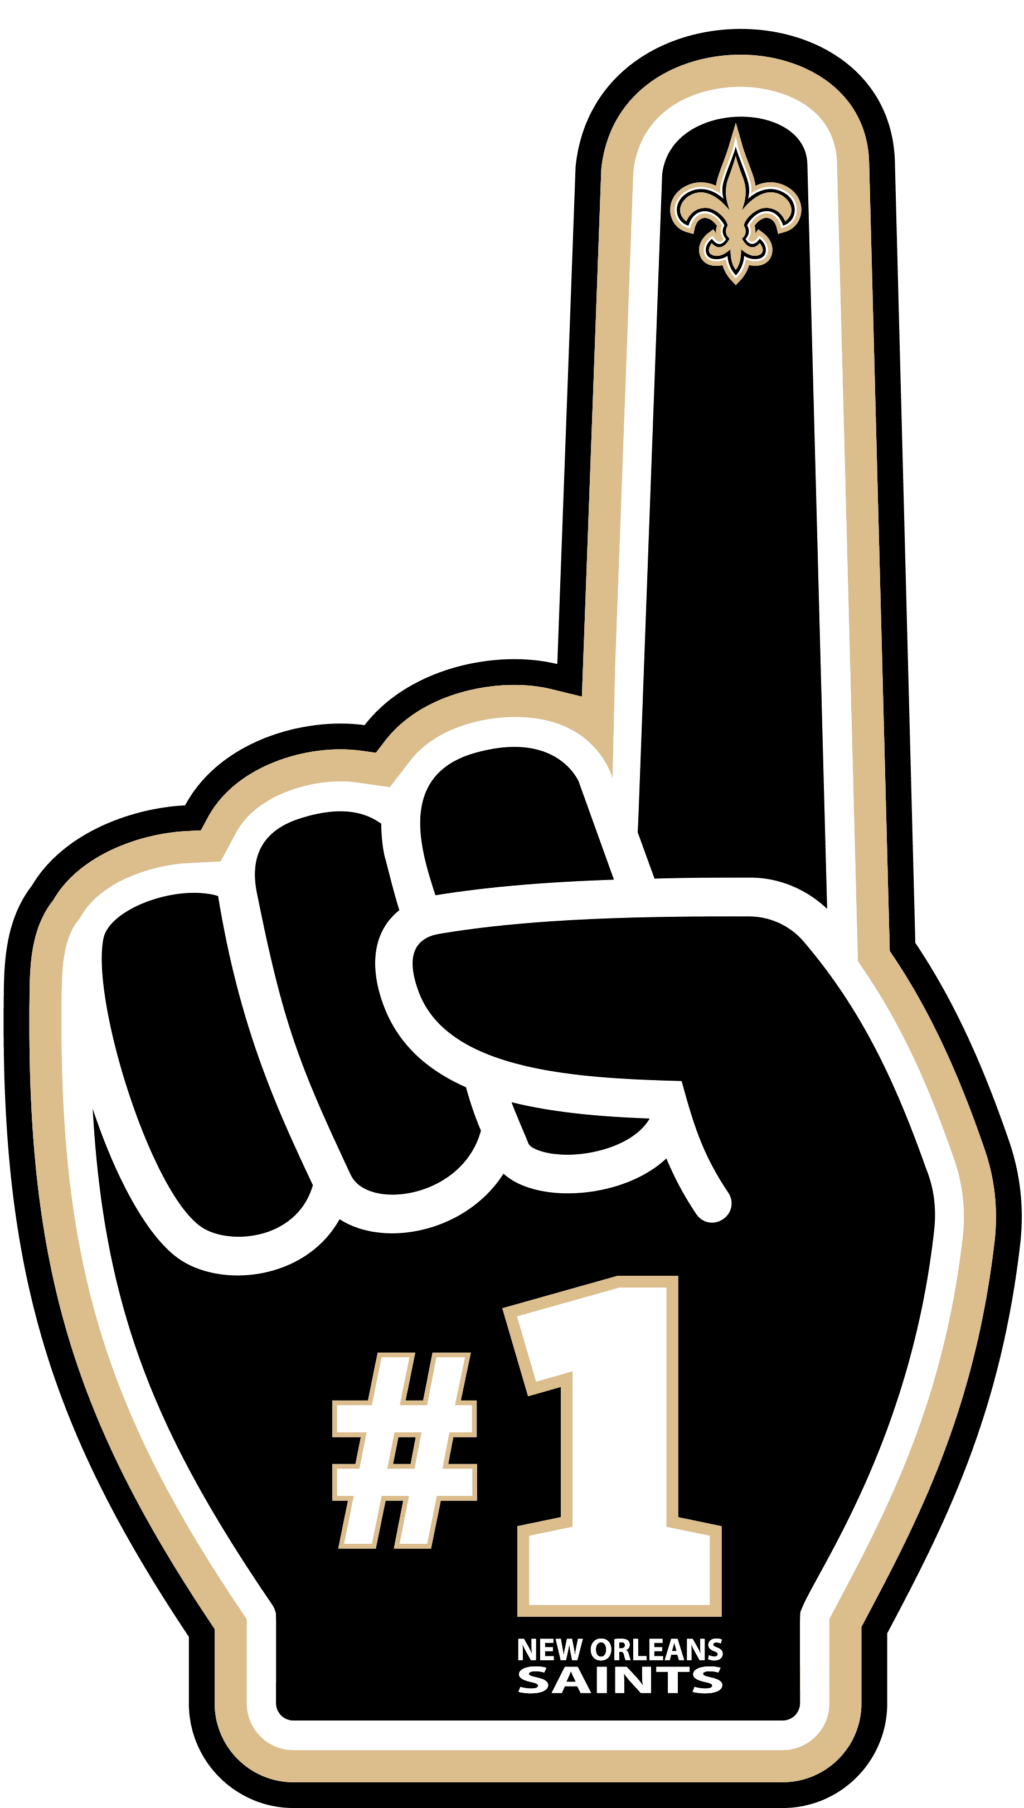 new orleans saints 15 NFL Logo New Orleans Saints, New Orleans Saints SVG, Vector New Orleans Saints Clipart New Orleans Saints American Football Kit New Orleans Saints, SVG, DXF, PNG, American Football Logo Vector New Orleans Saints EPS download NFL-files for silhouette, New Orleans Saints files for clipping.